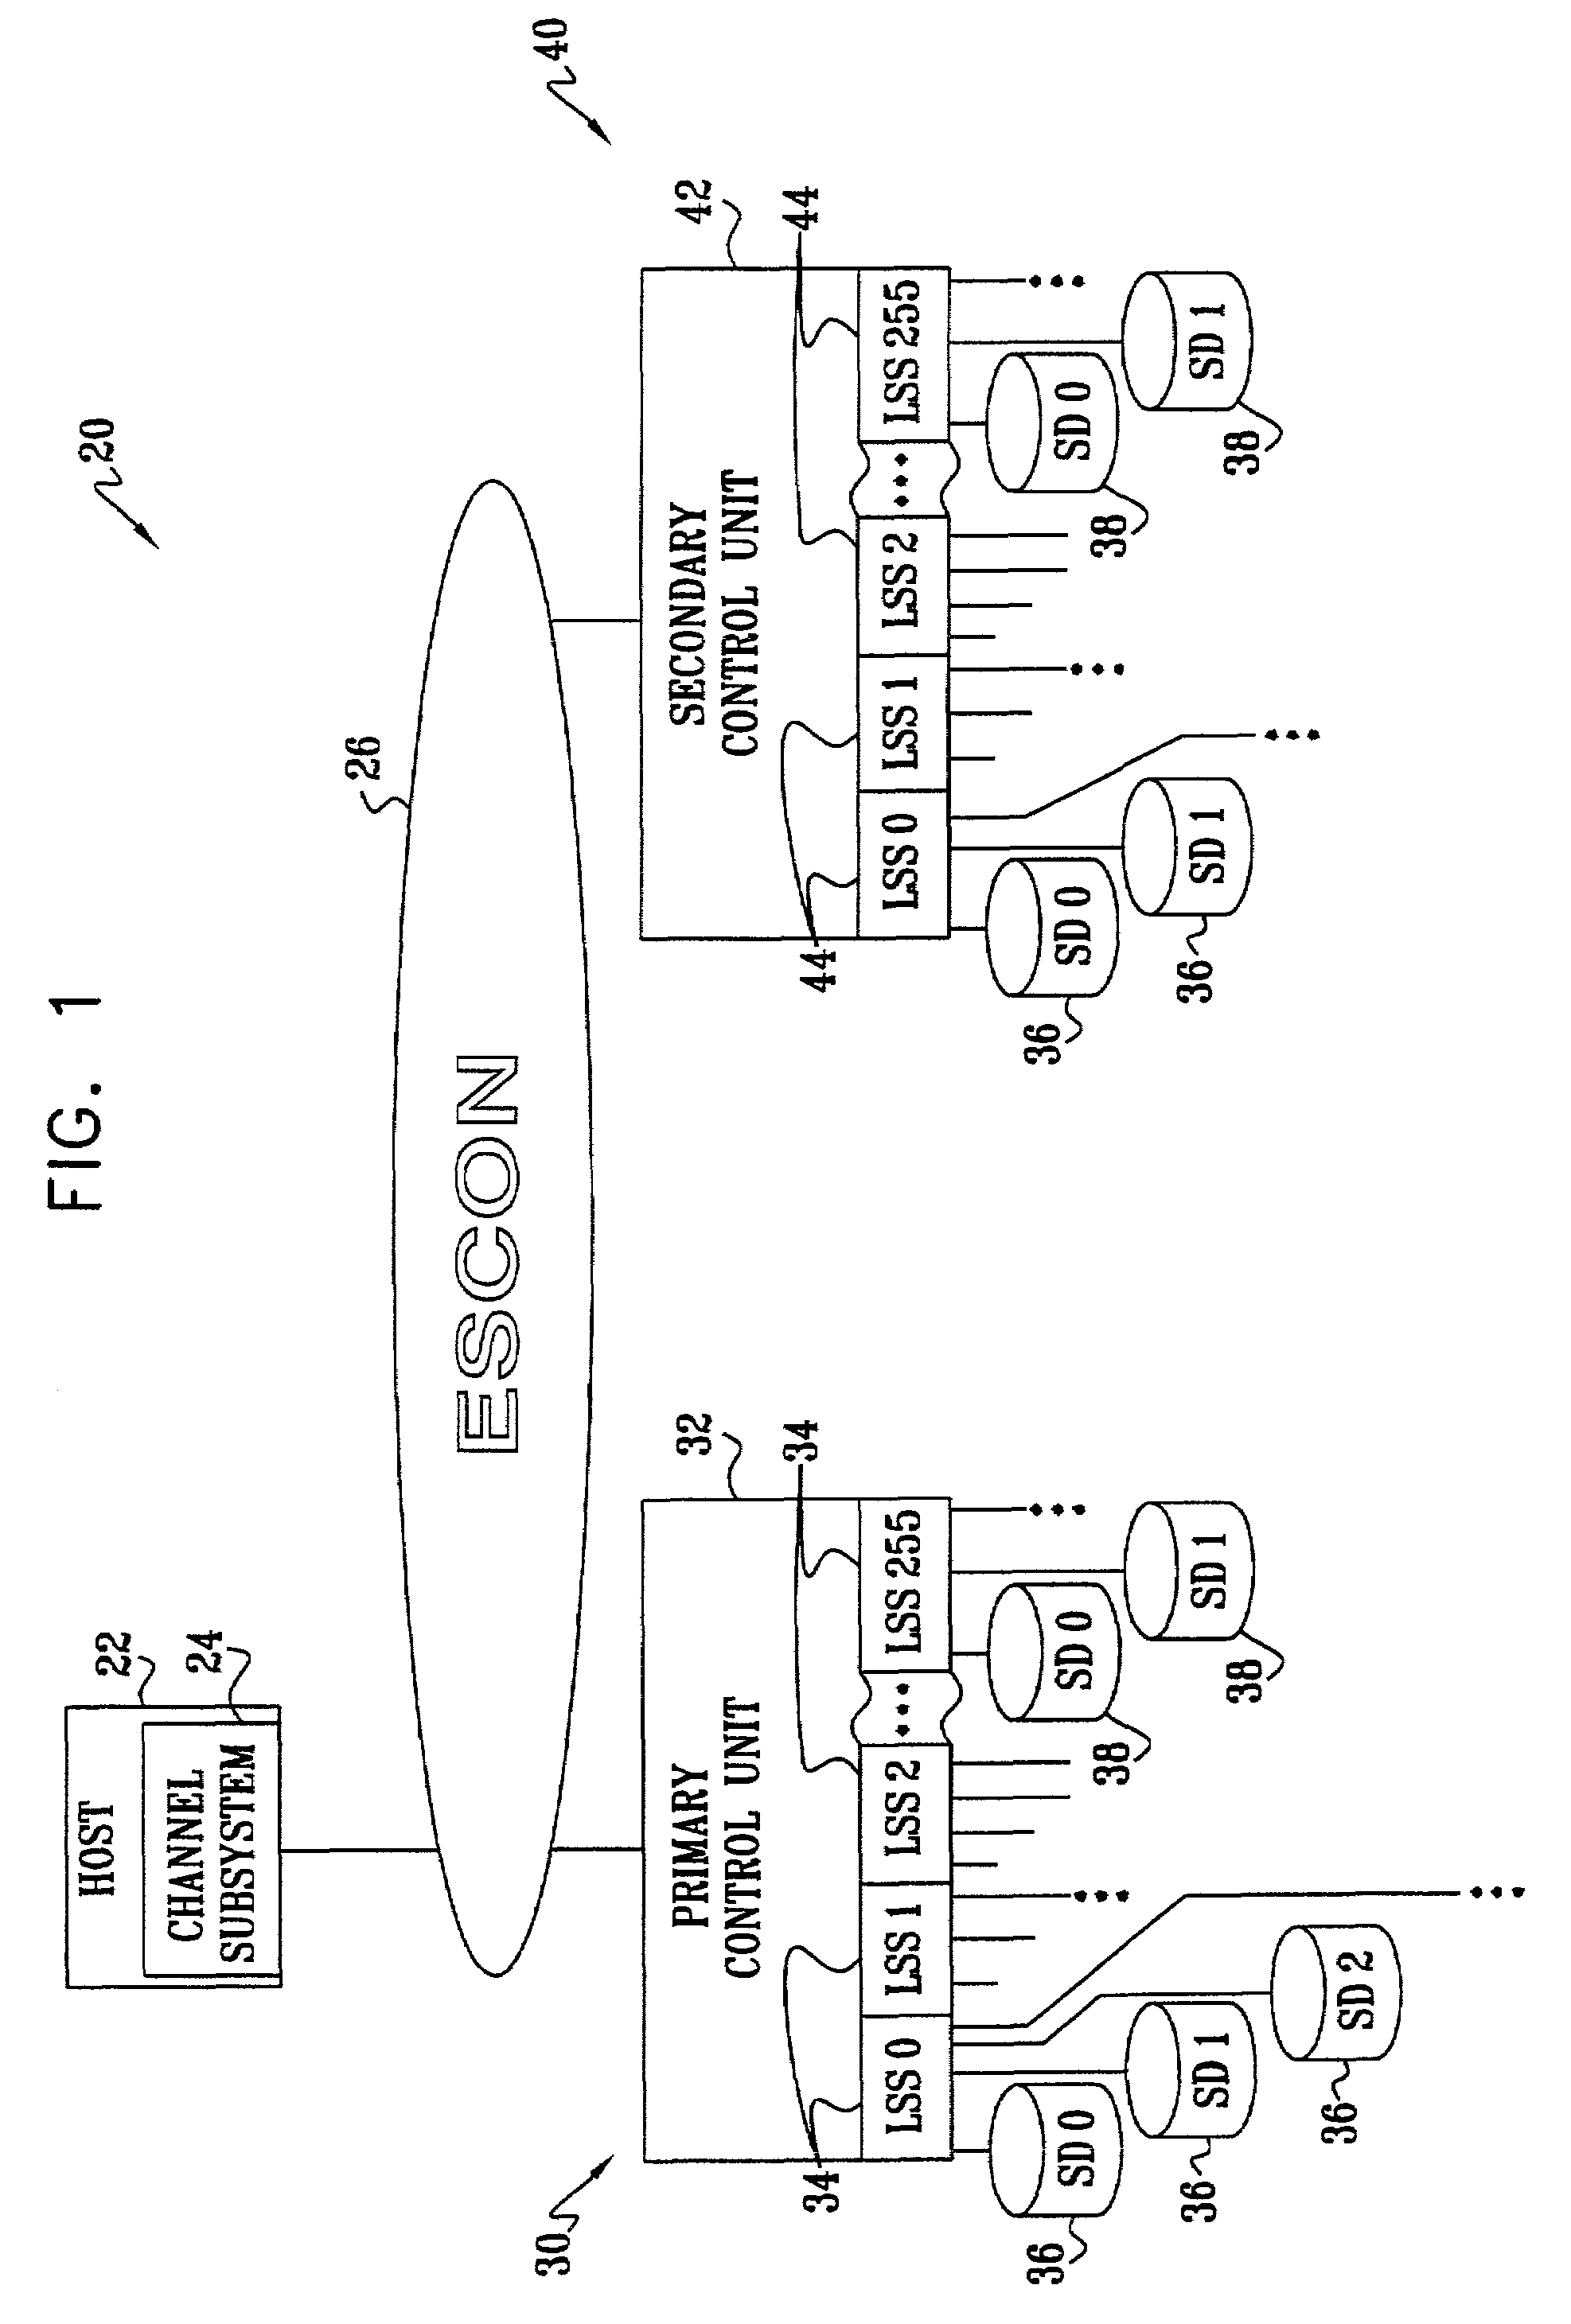 Data communication with a protocol that supports a given logical address range